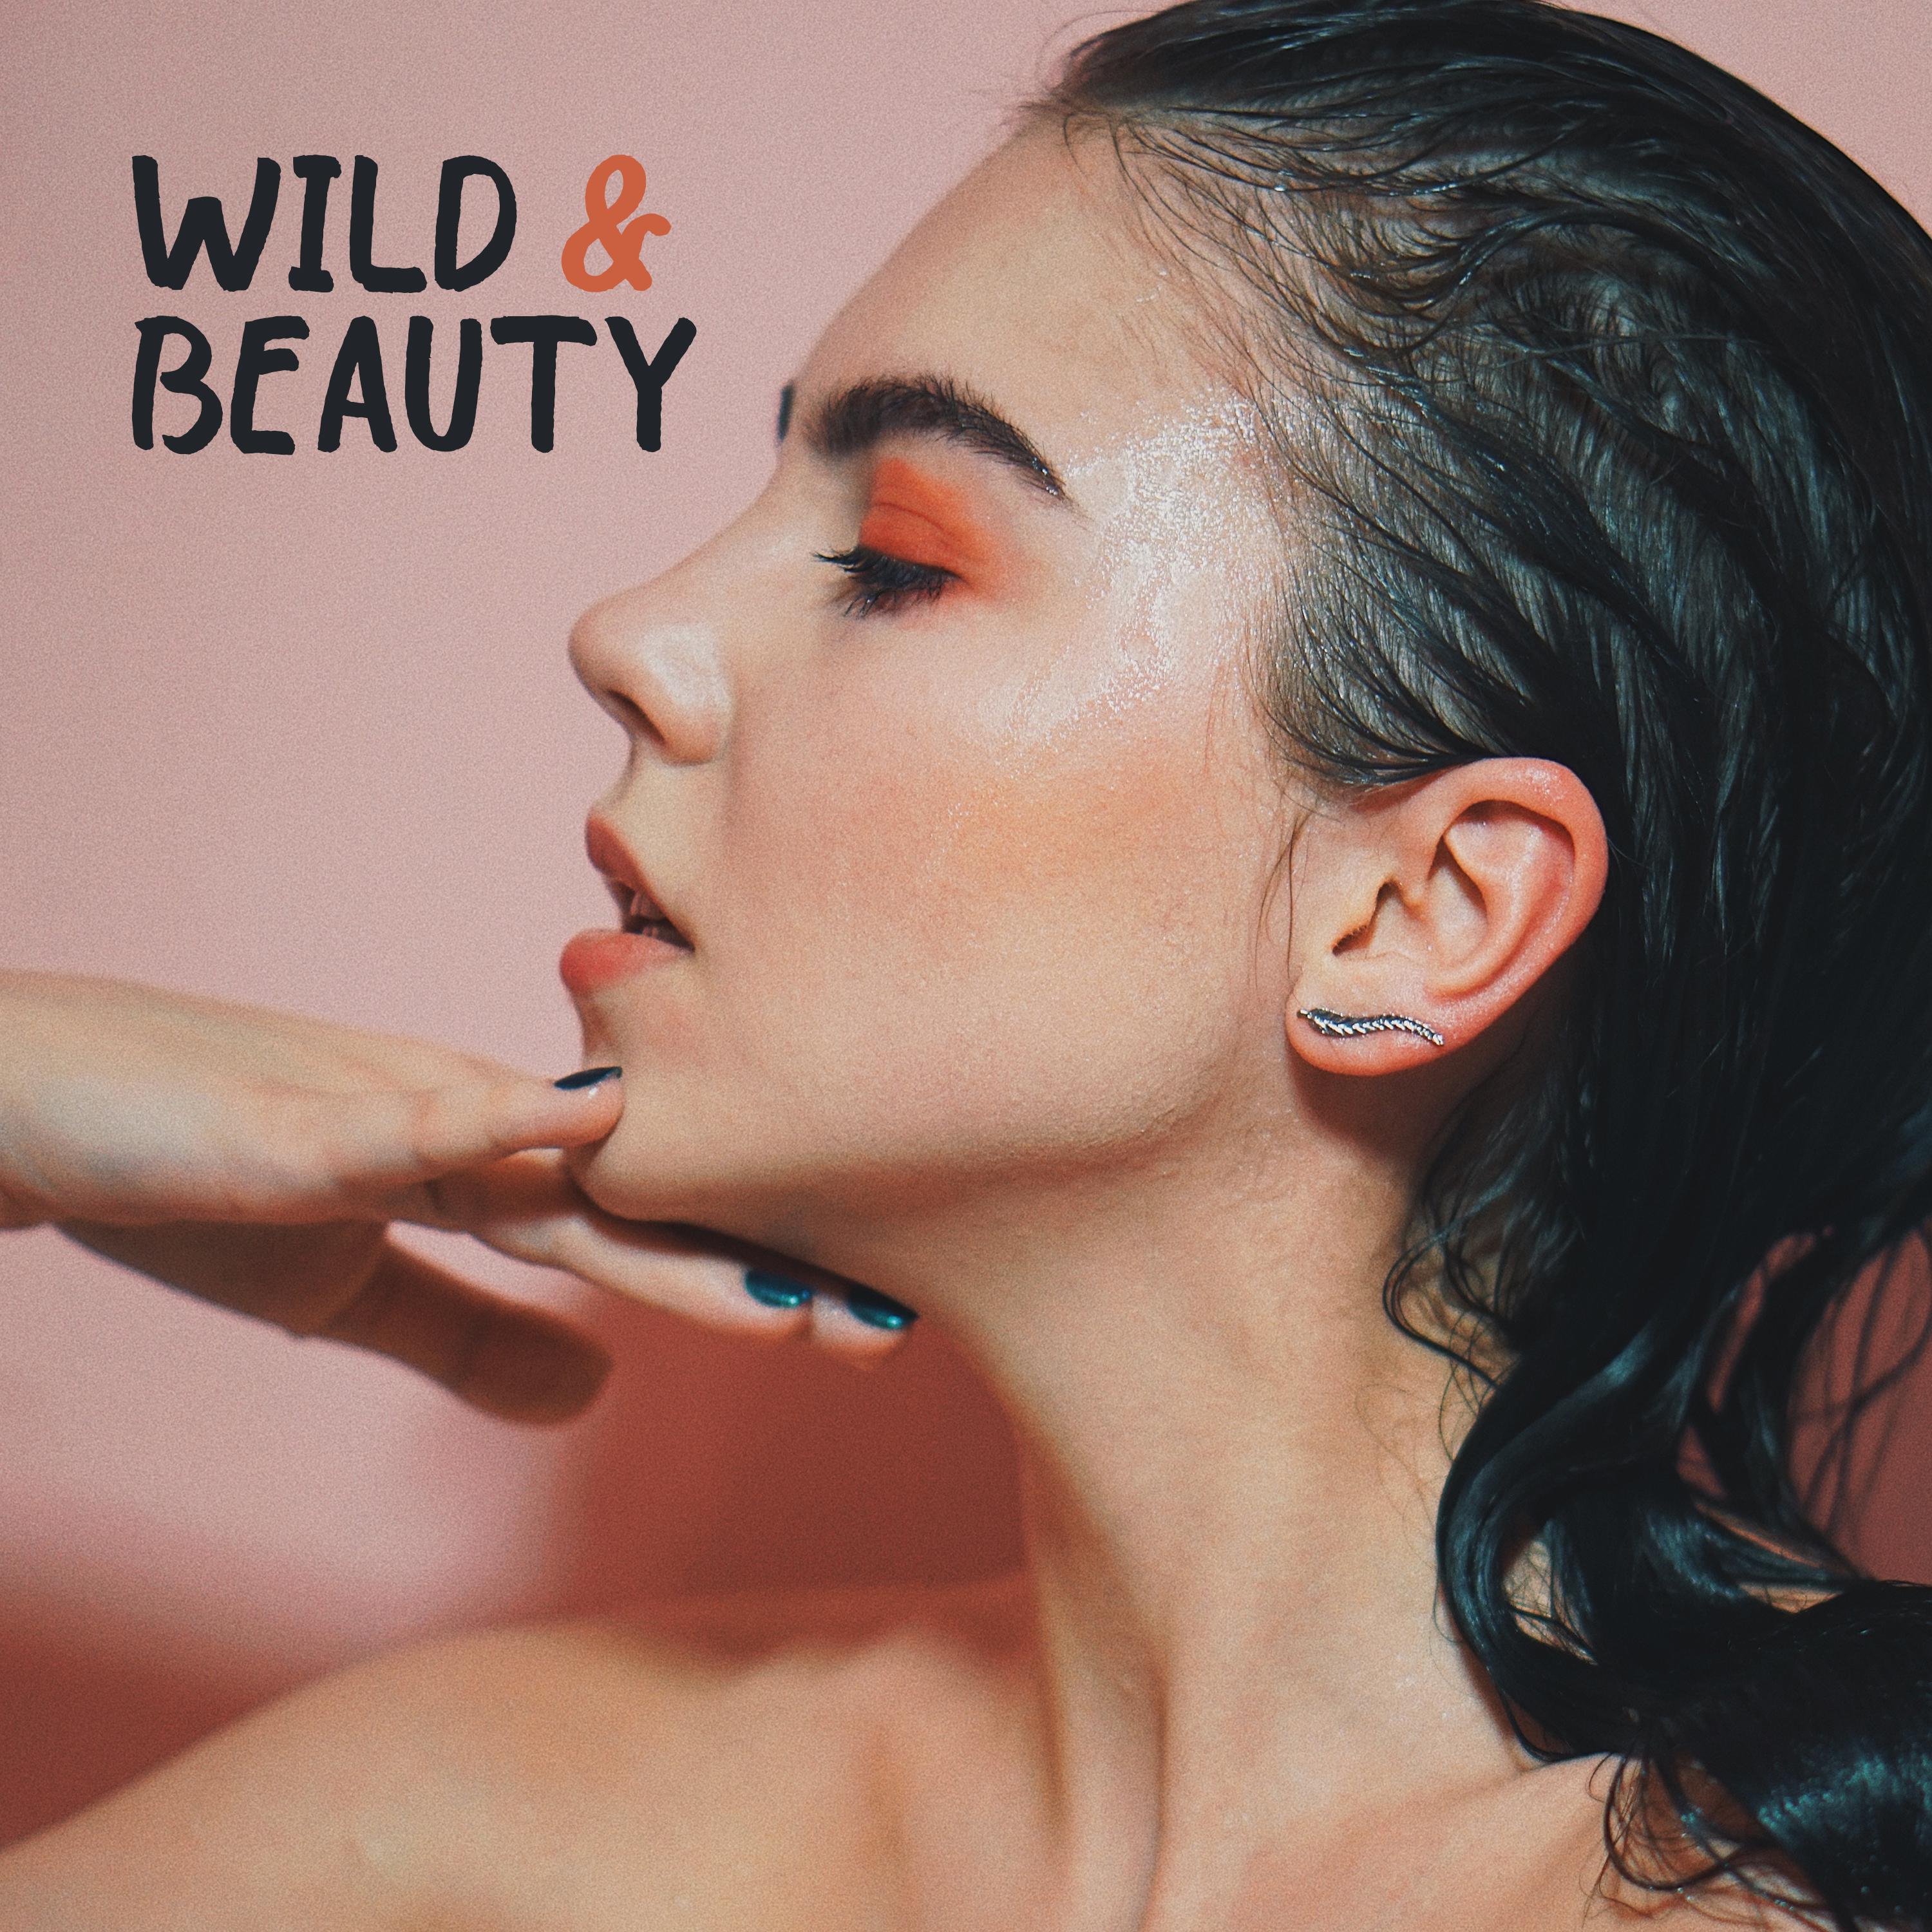 Wild & Beauty (Wellness & Spa for Two, Sensual Weekend)